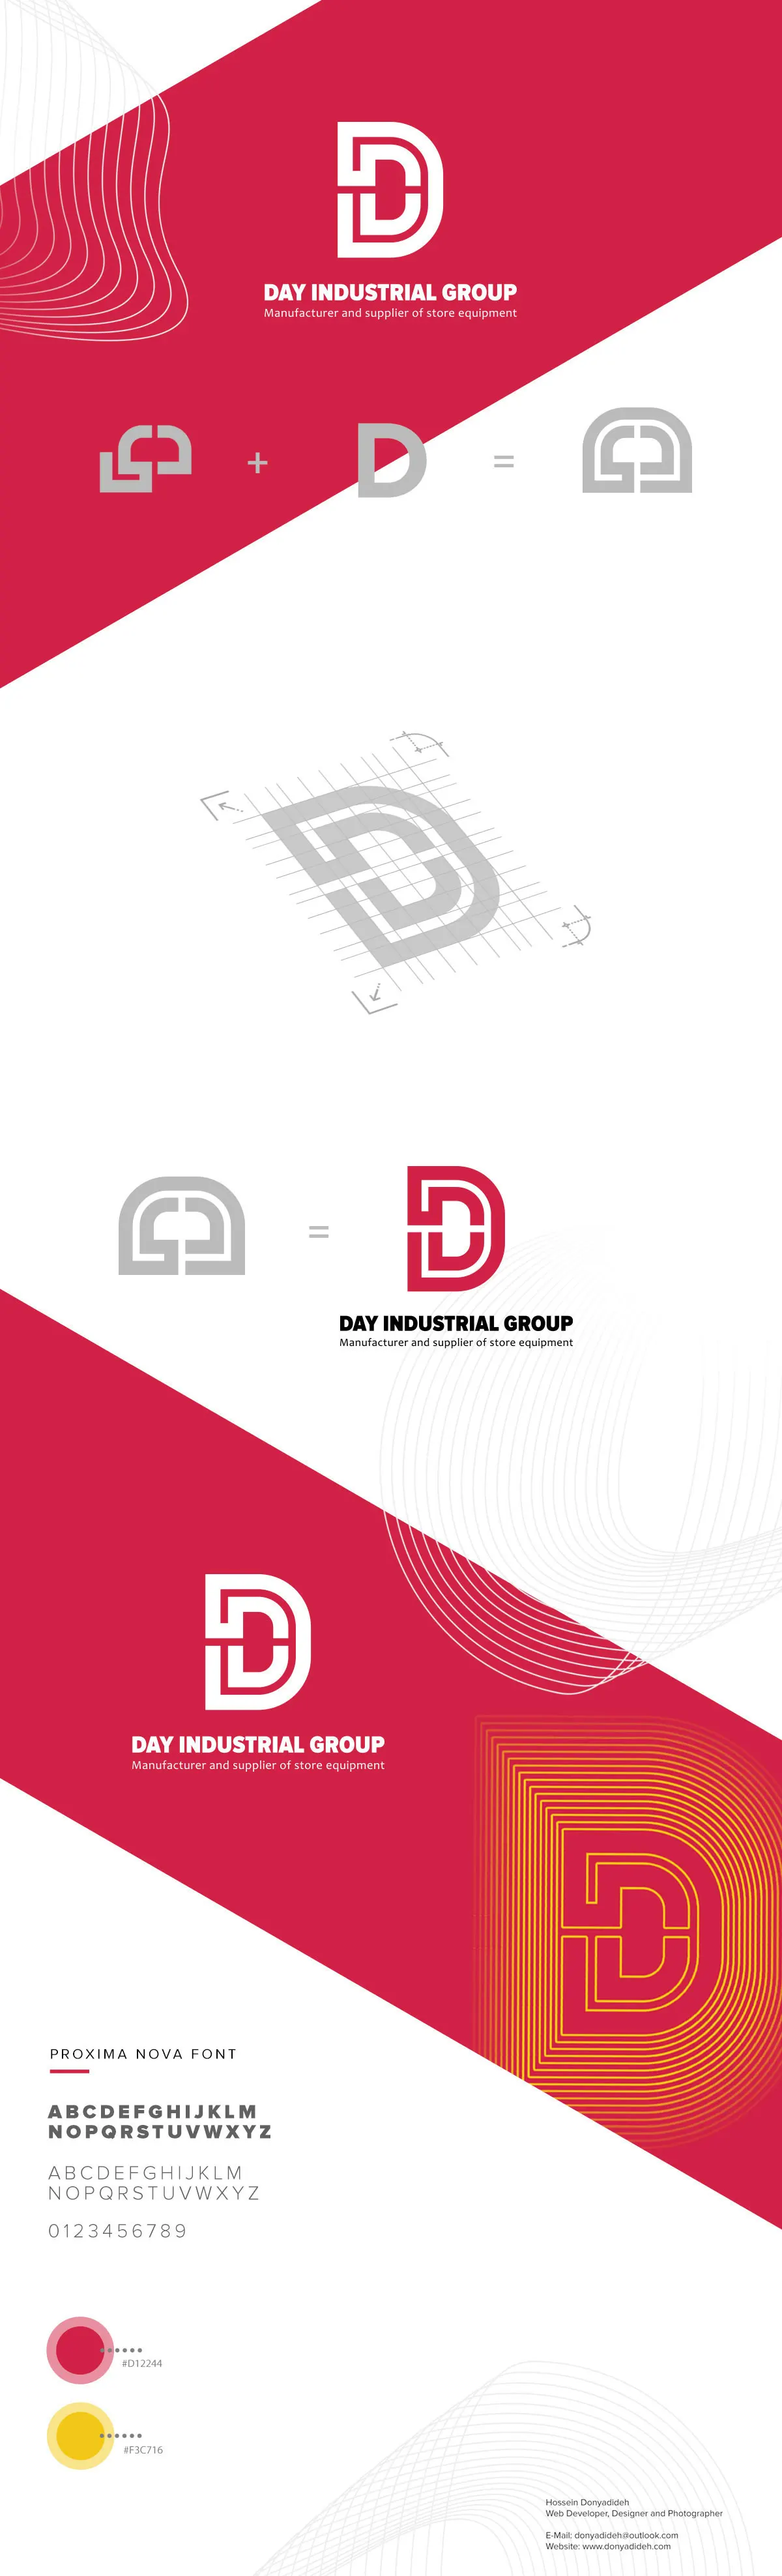 Day Industrial Group logo design | Hossein Donyadideh